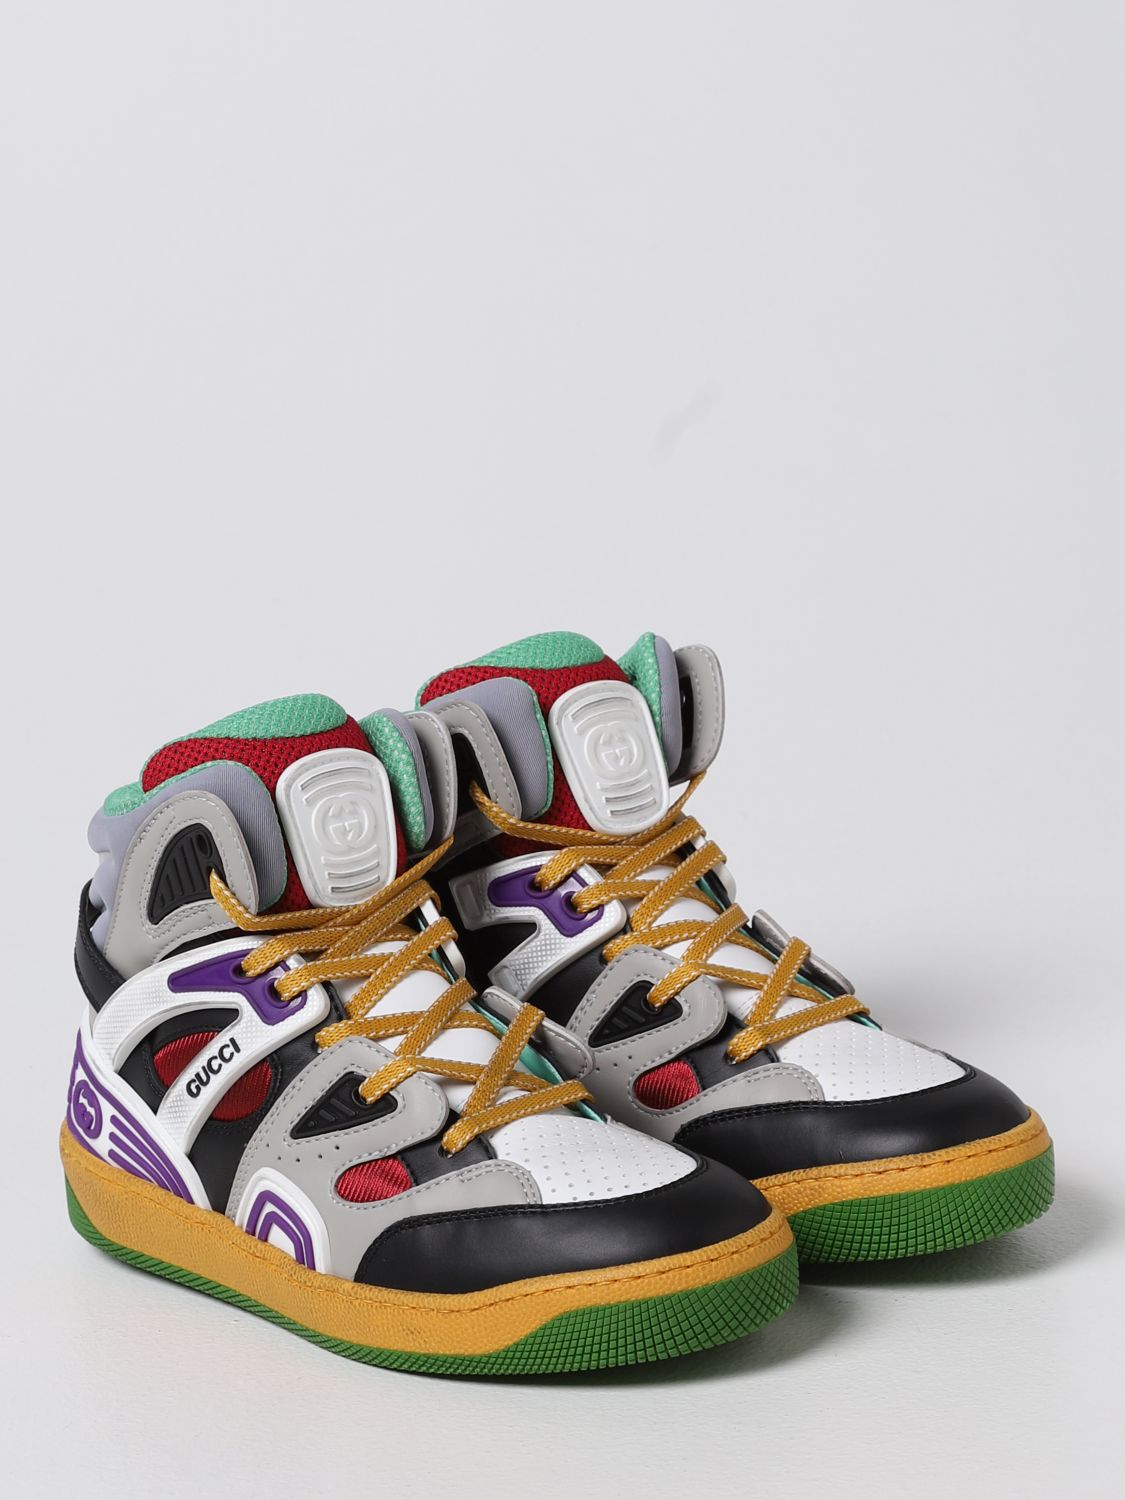 Chaussures Gucci: Chaussures Gucci fille multicolore 2